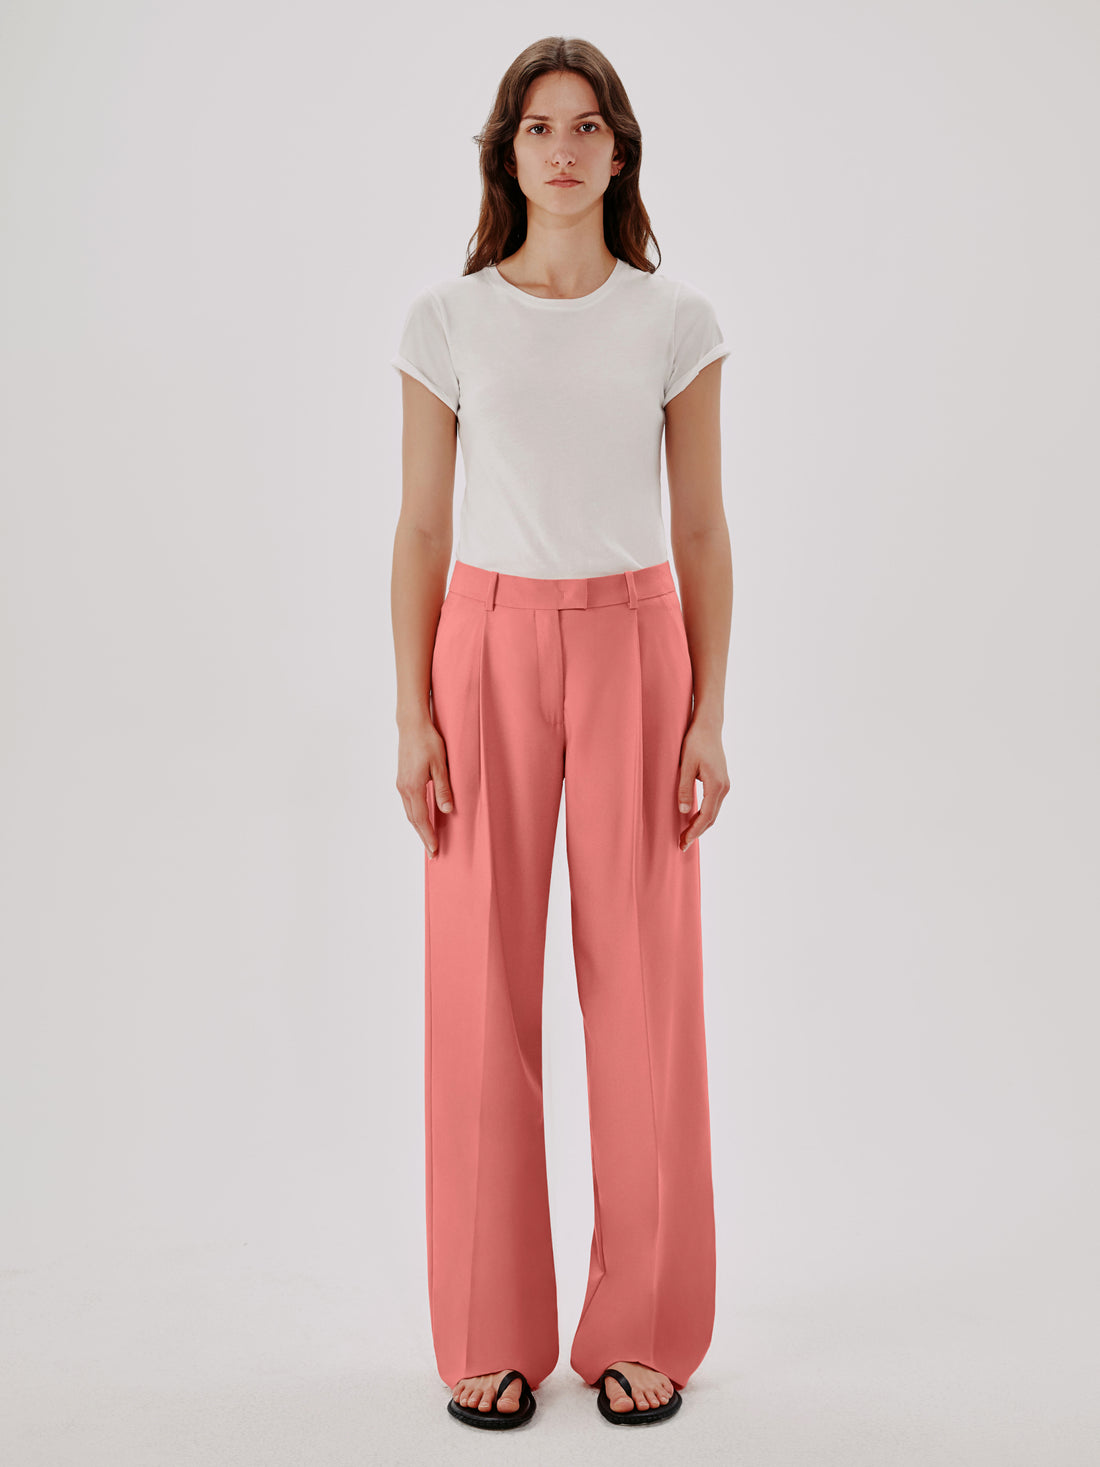 Product image17 with color pink